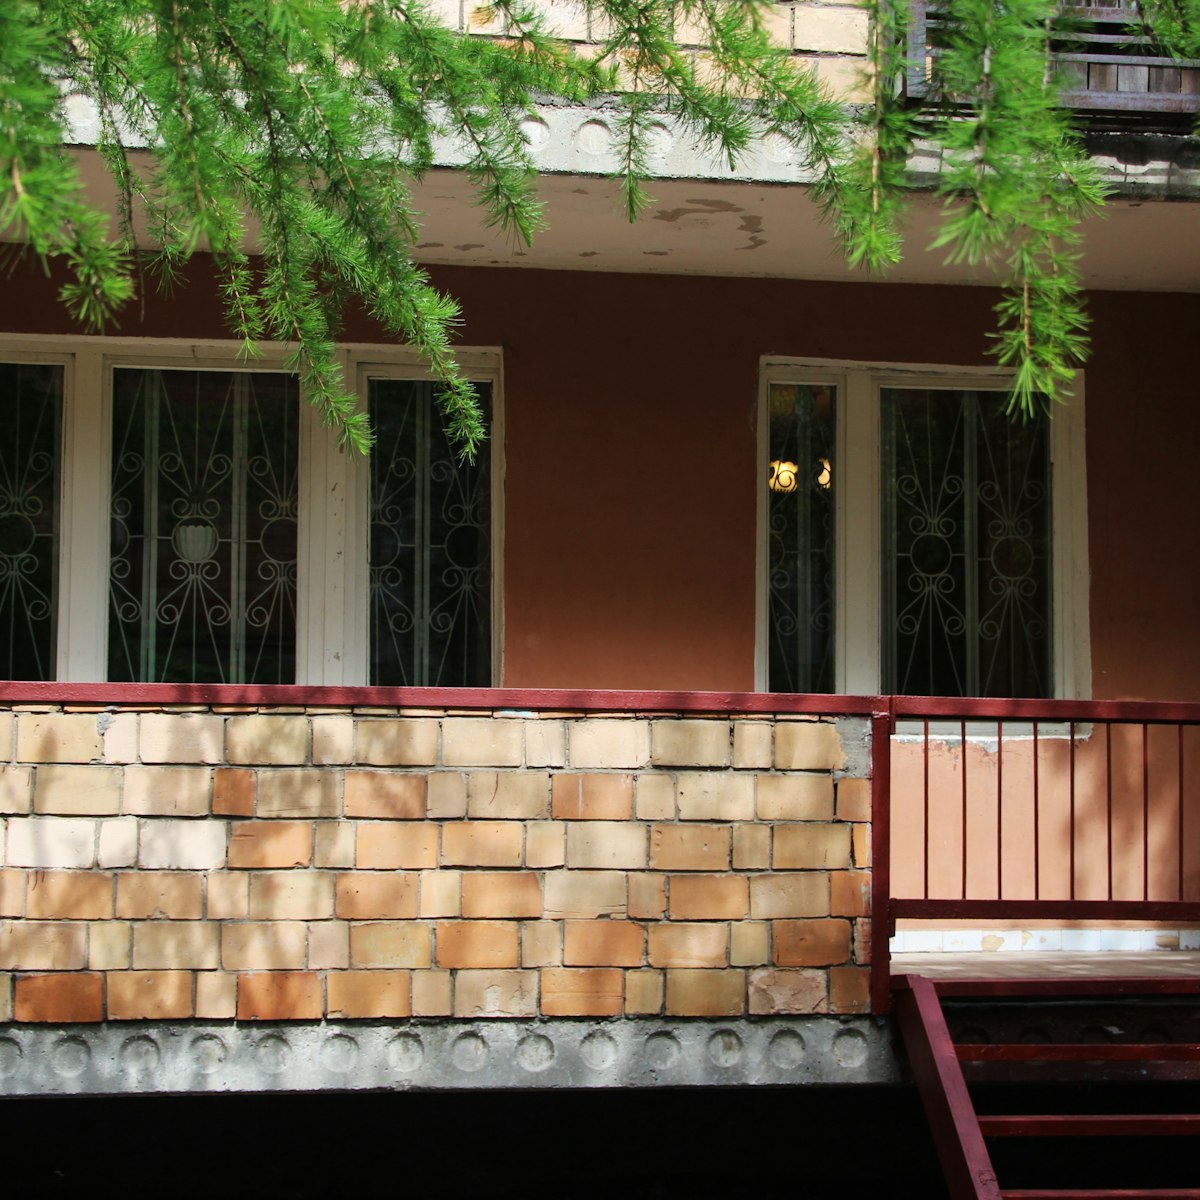 Balcony of Museum-apartment of the Nobel Peace Prize laureate, Academician Andrei Dmitrievich Sakharov, who lived here during his exile from 1980 to 1986.
